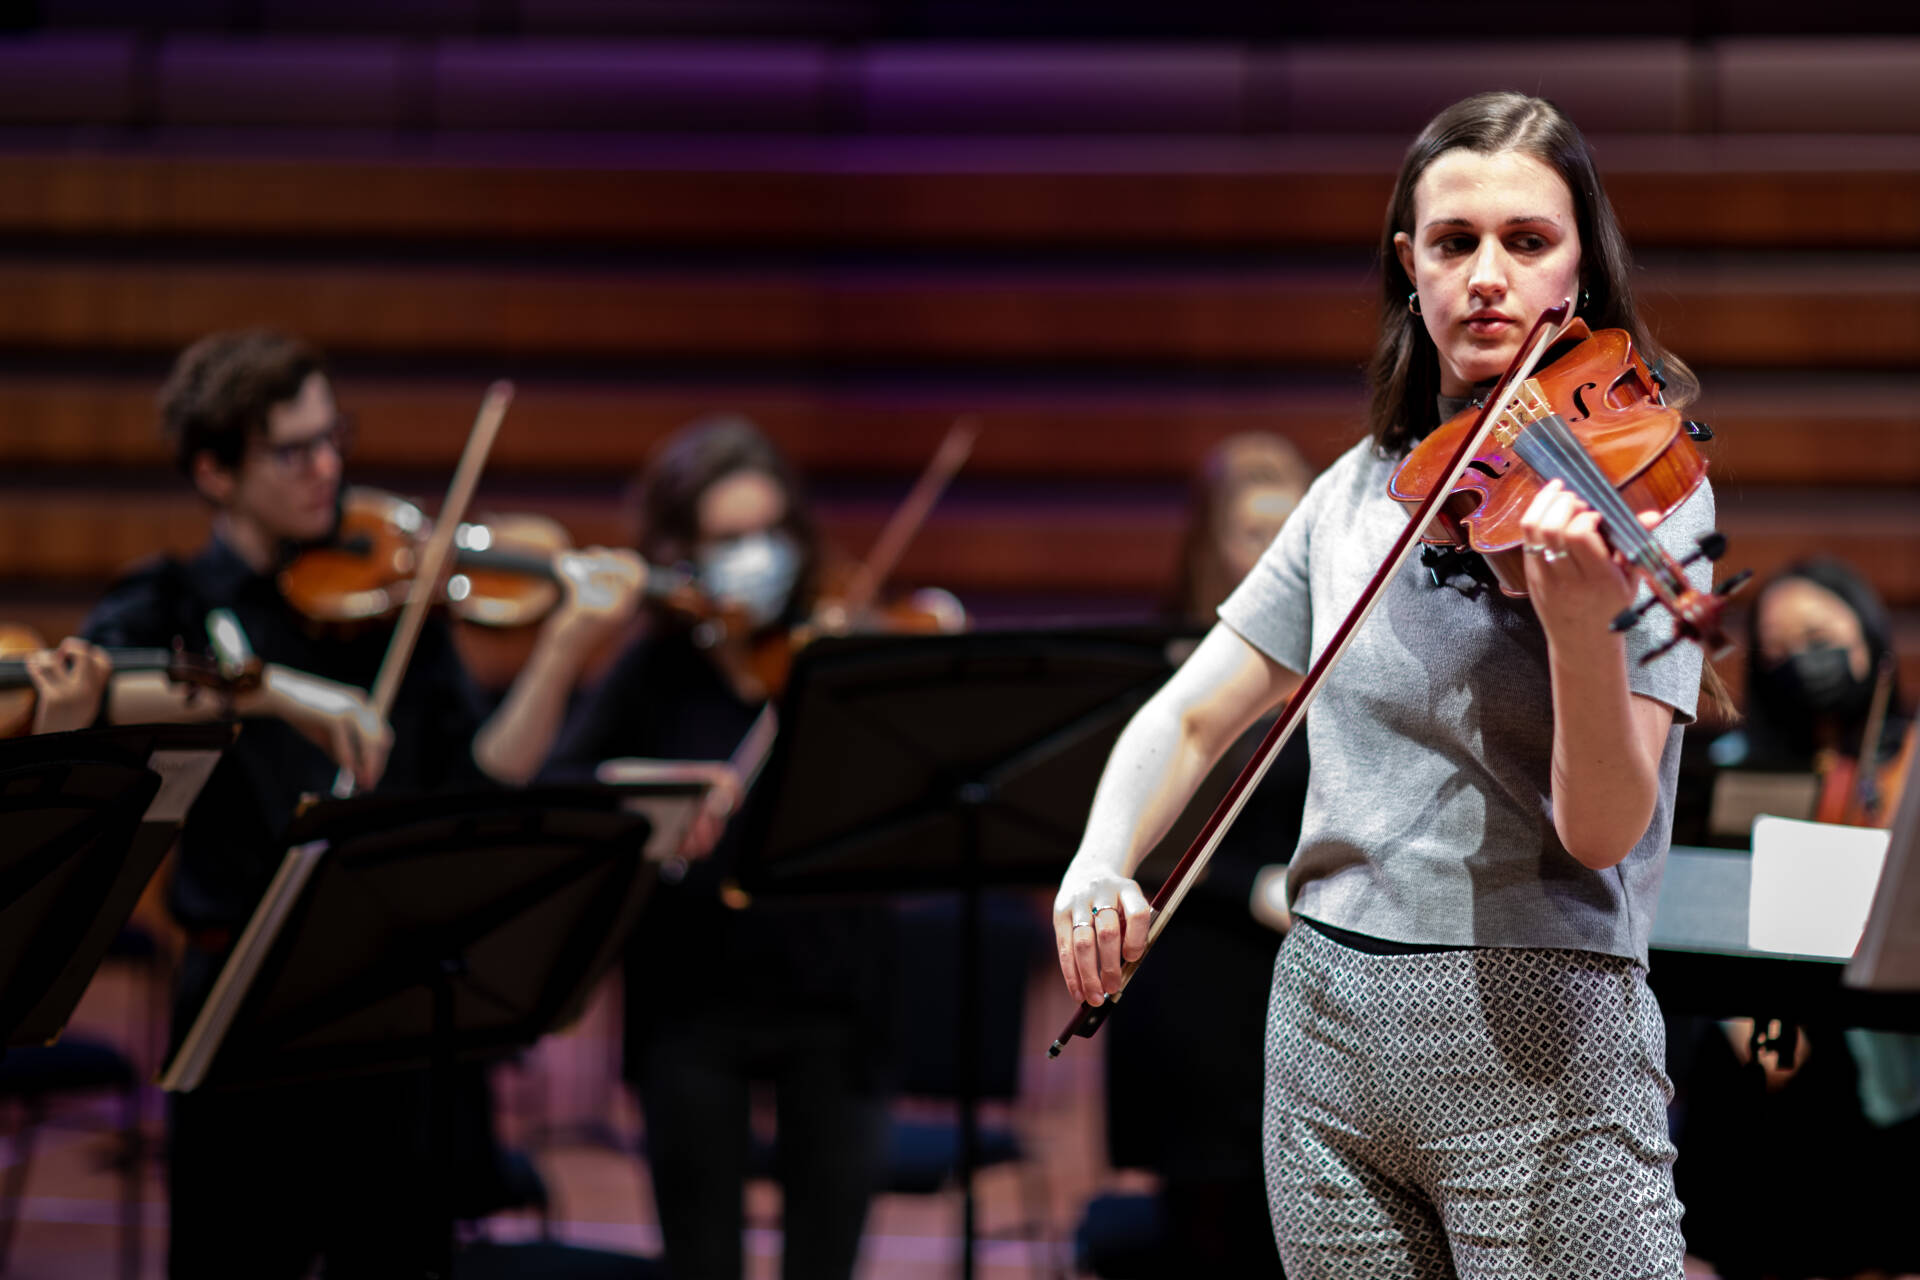 Female viola player dressed in grey, behind her out of focus other string players wearing black